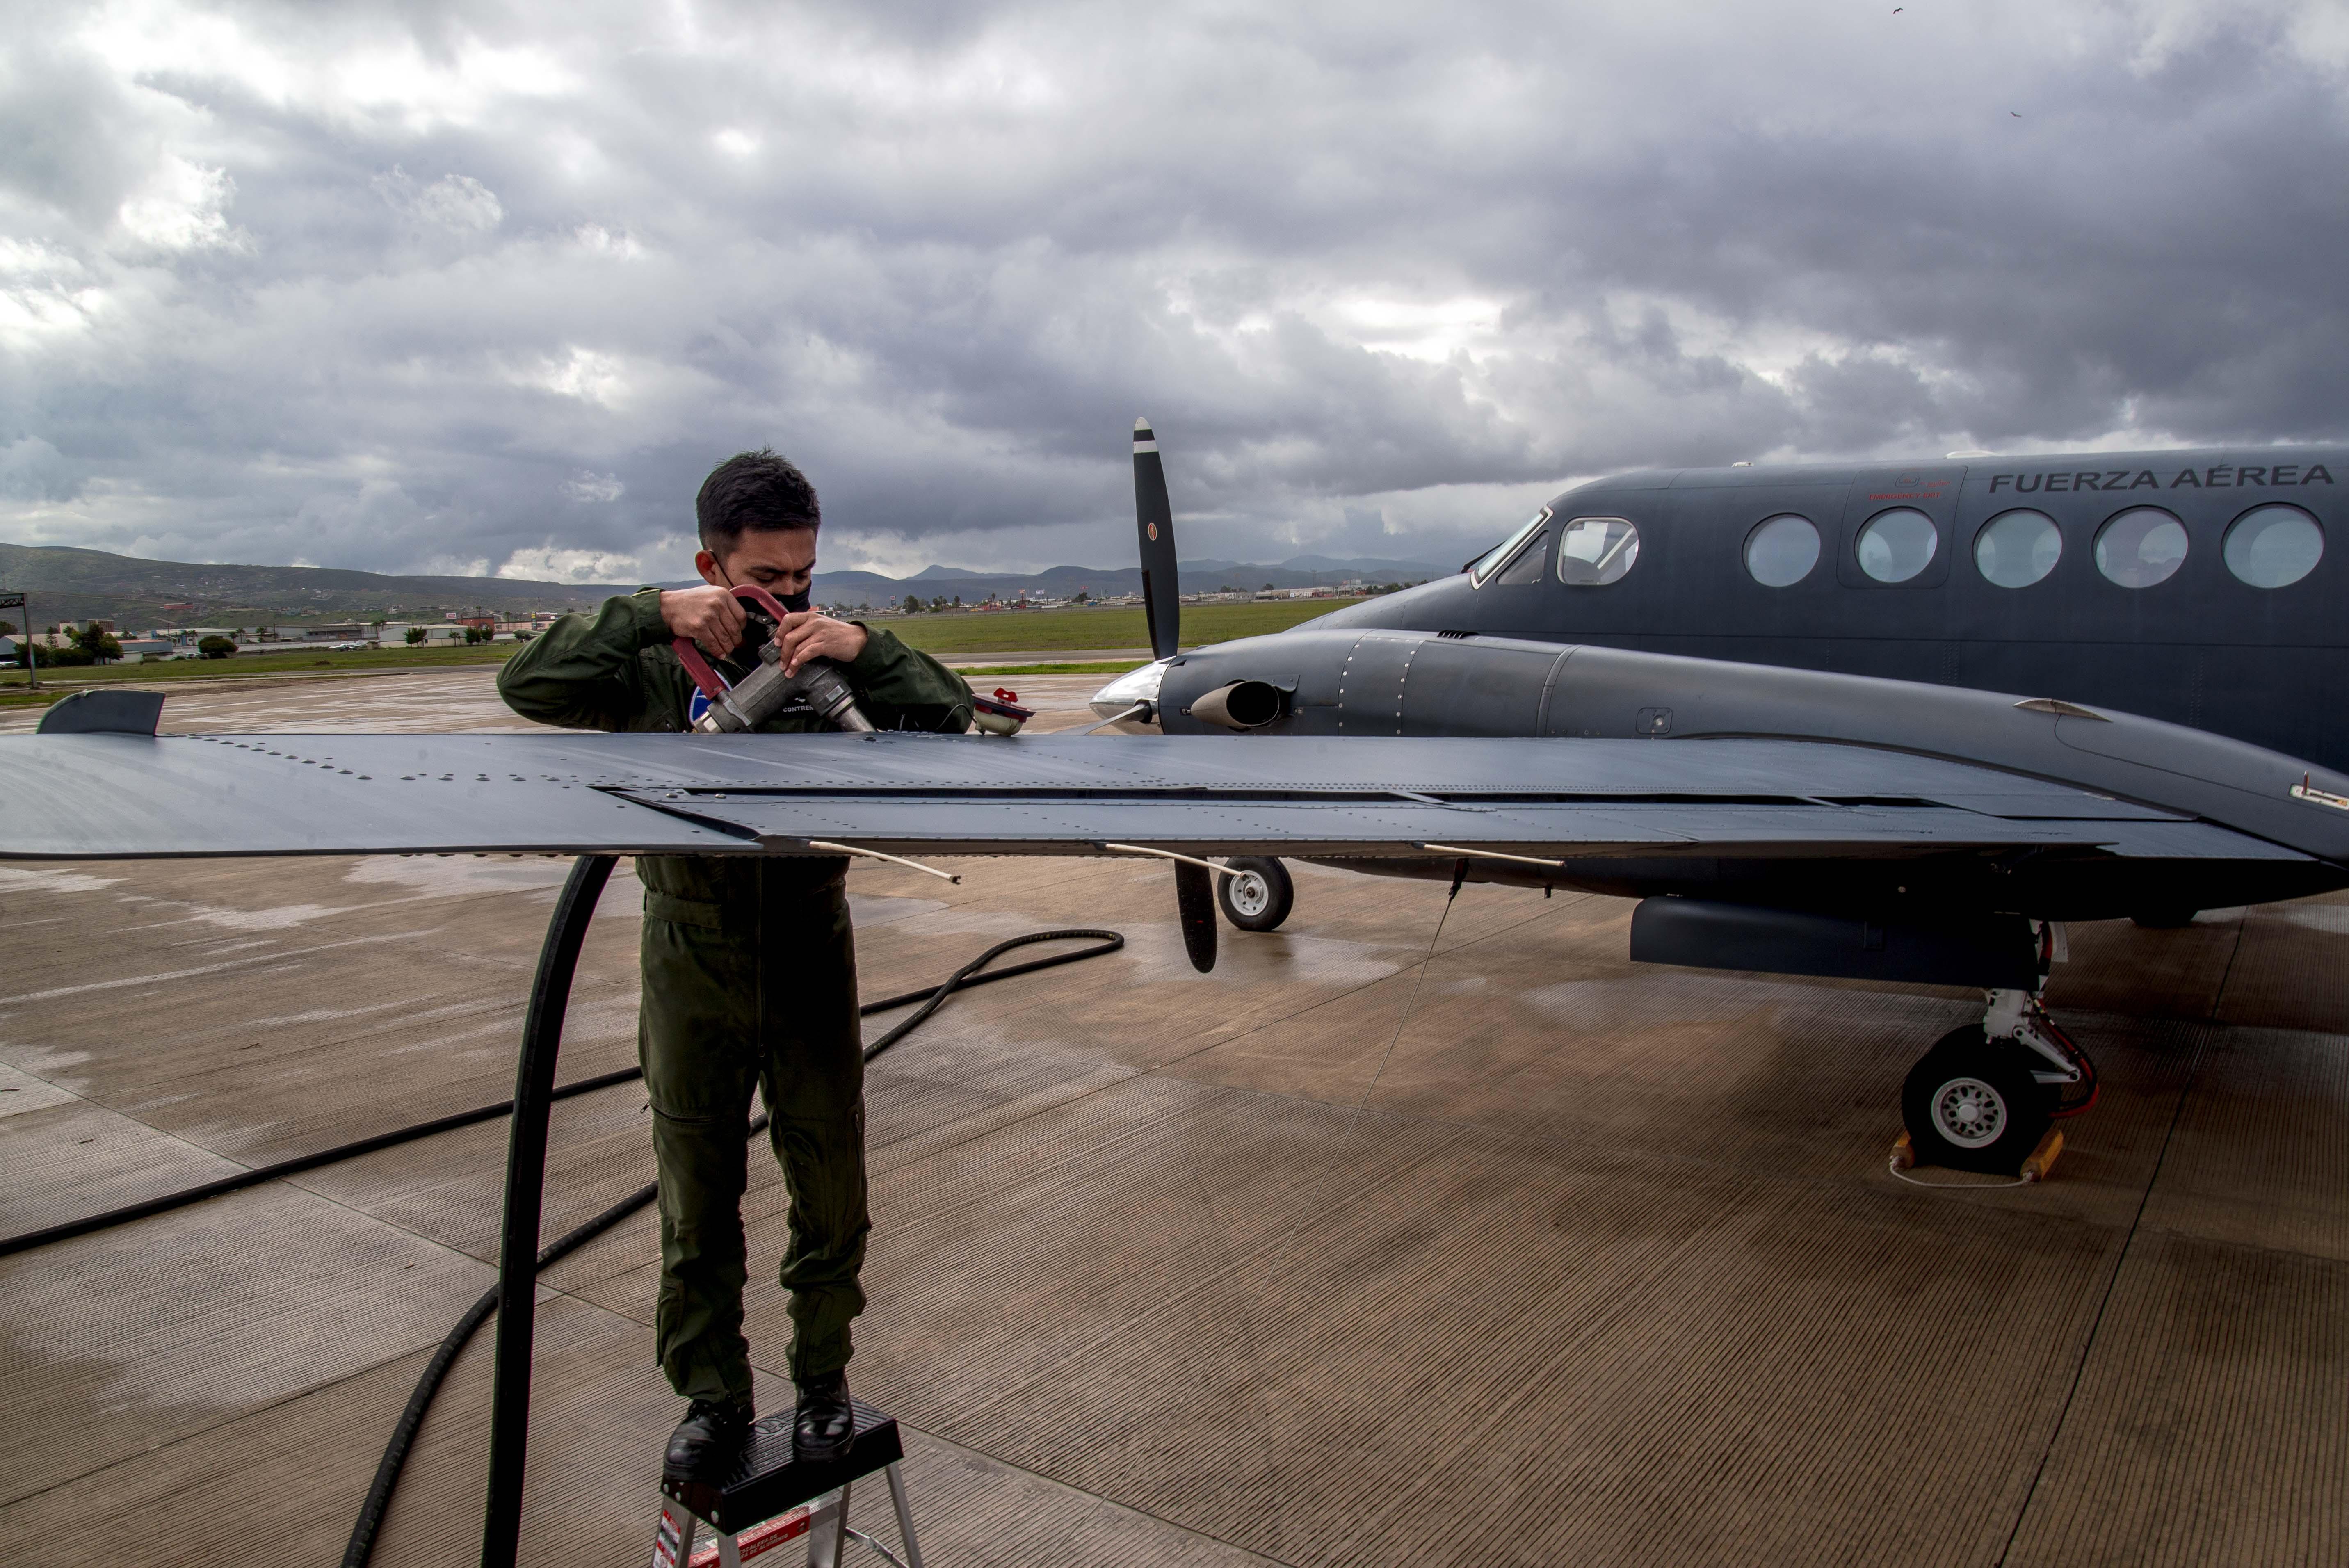 A pilot recharges fuel on the wing of an aircraft at FAM